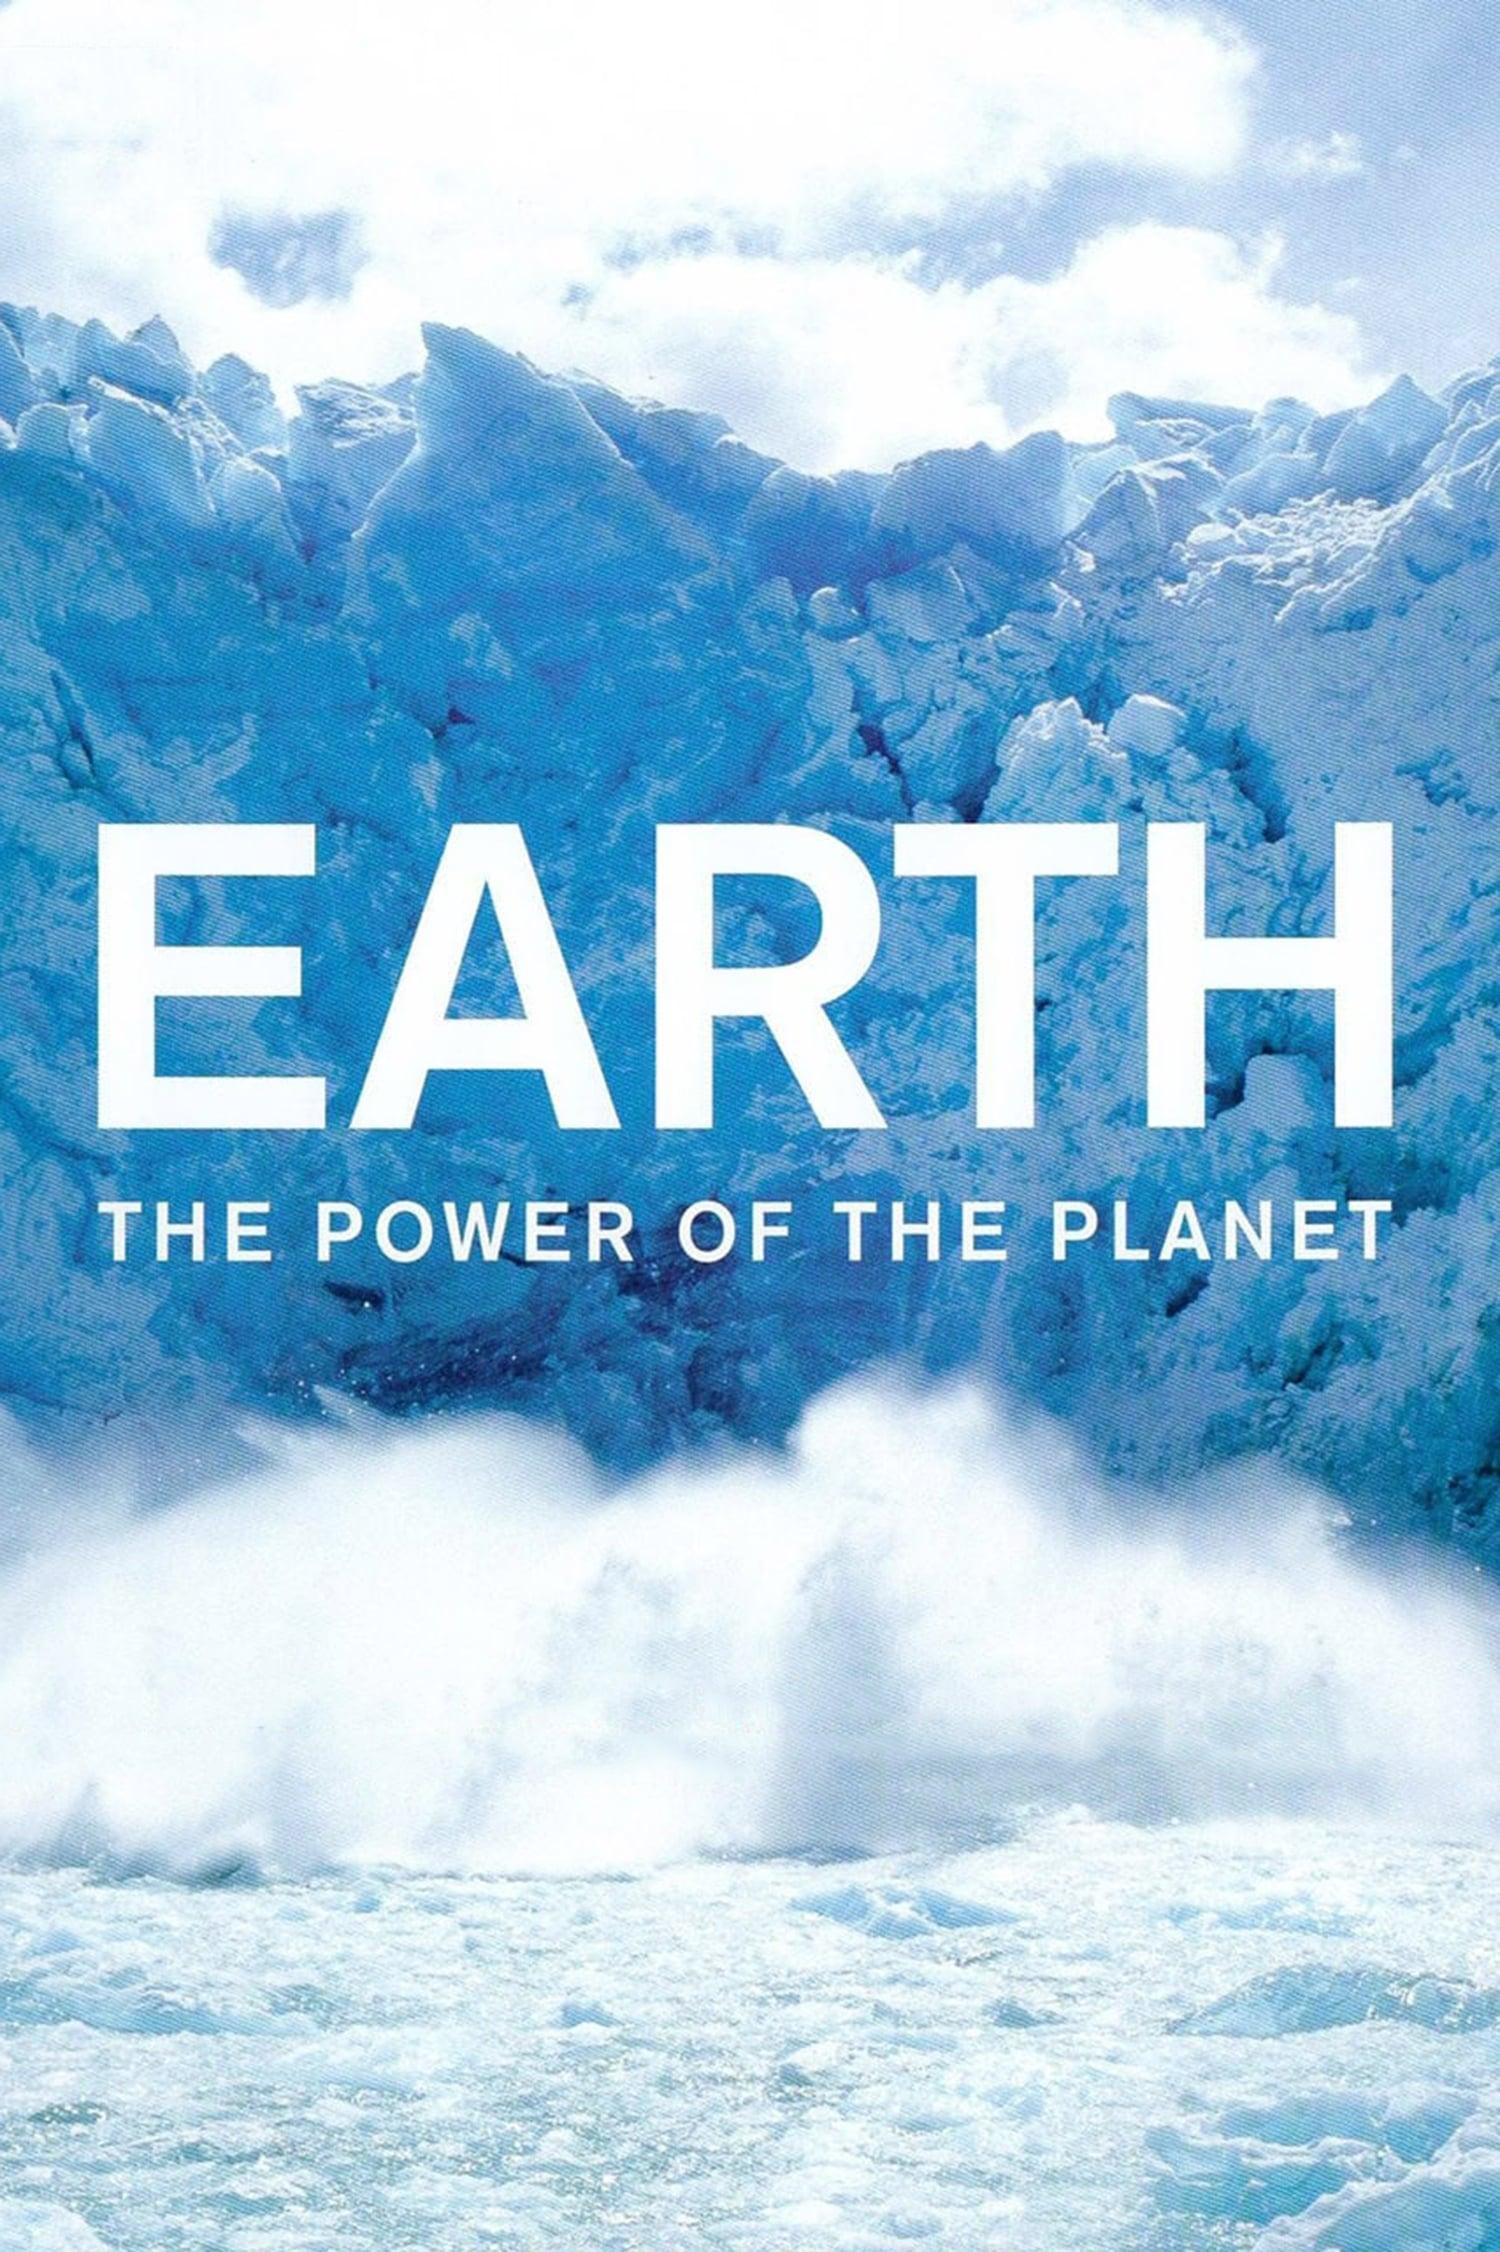 Earth: The Power of the Planet poster